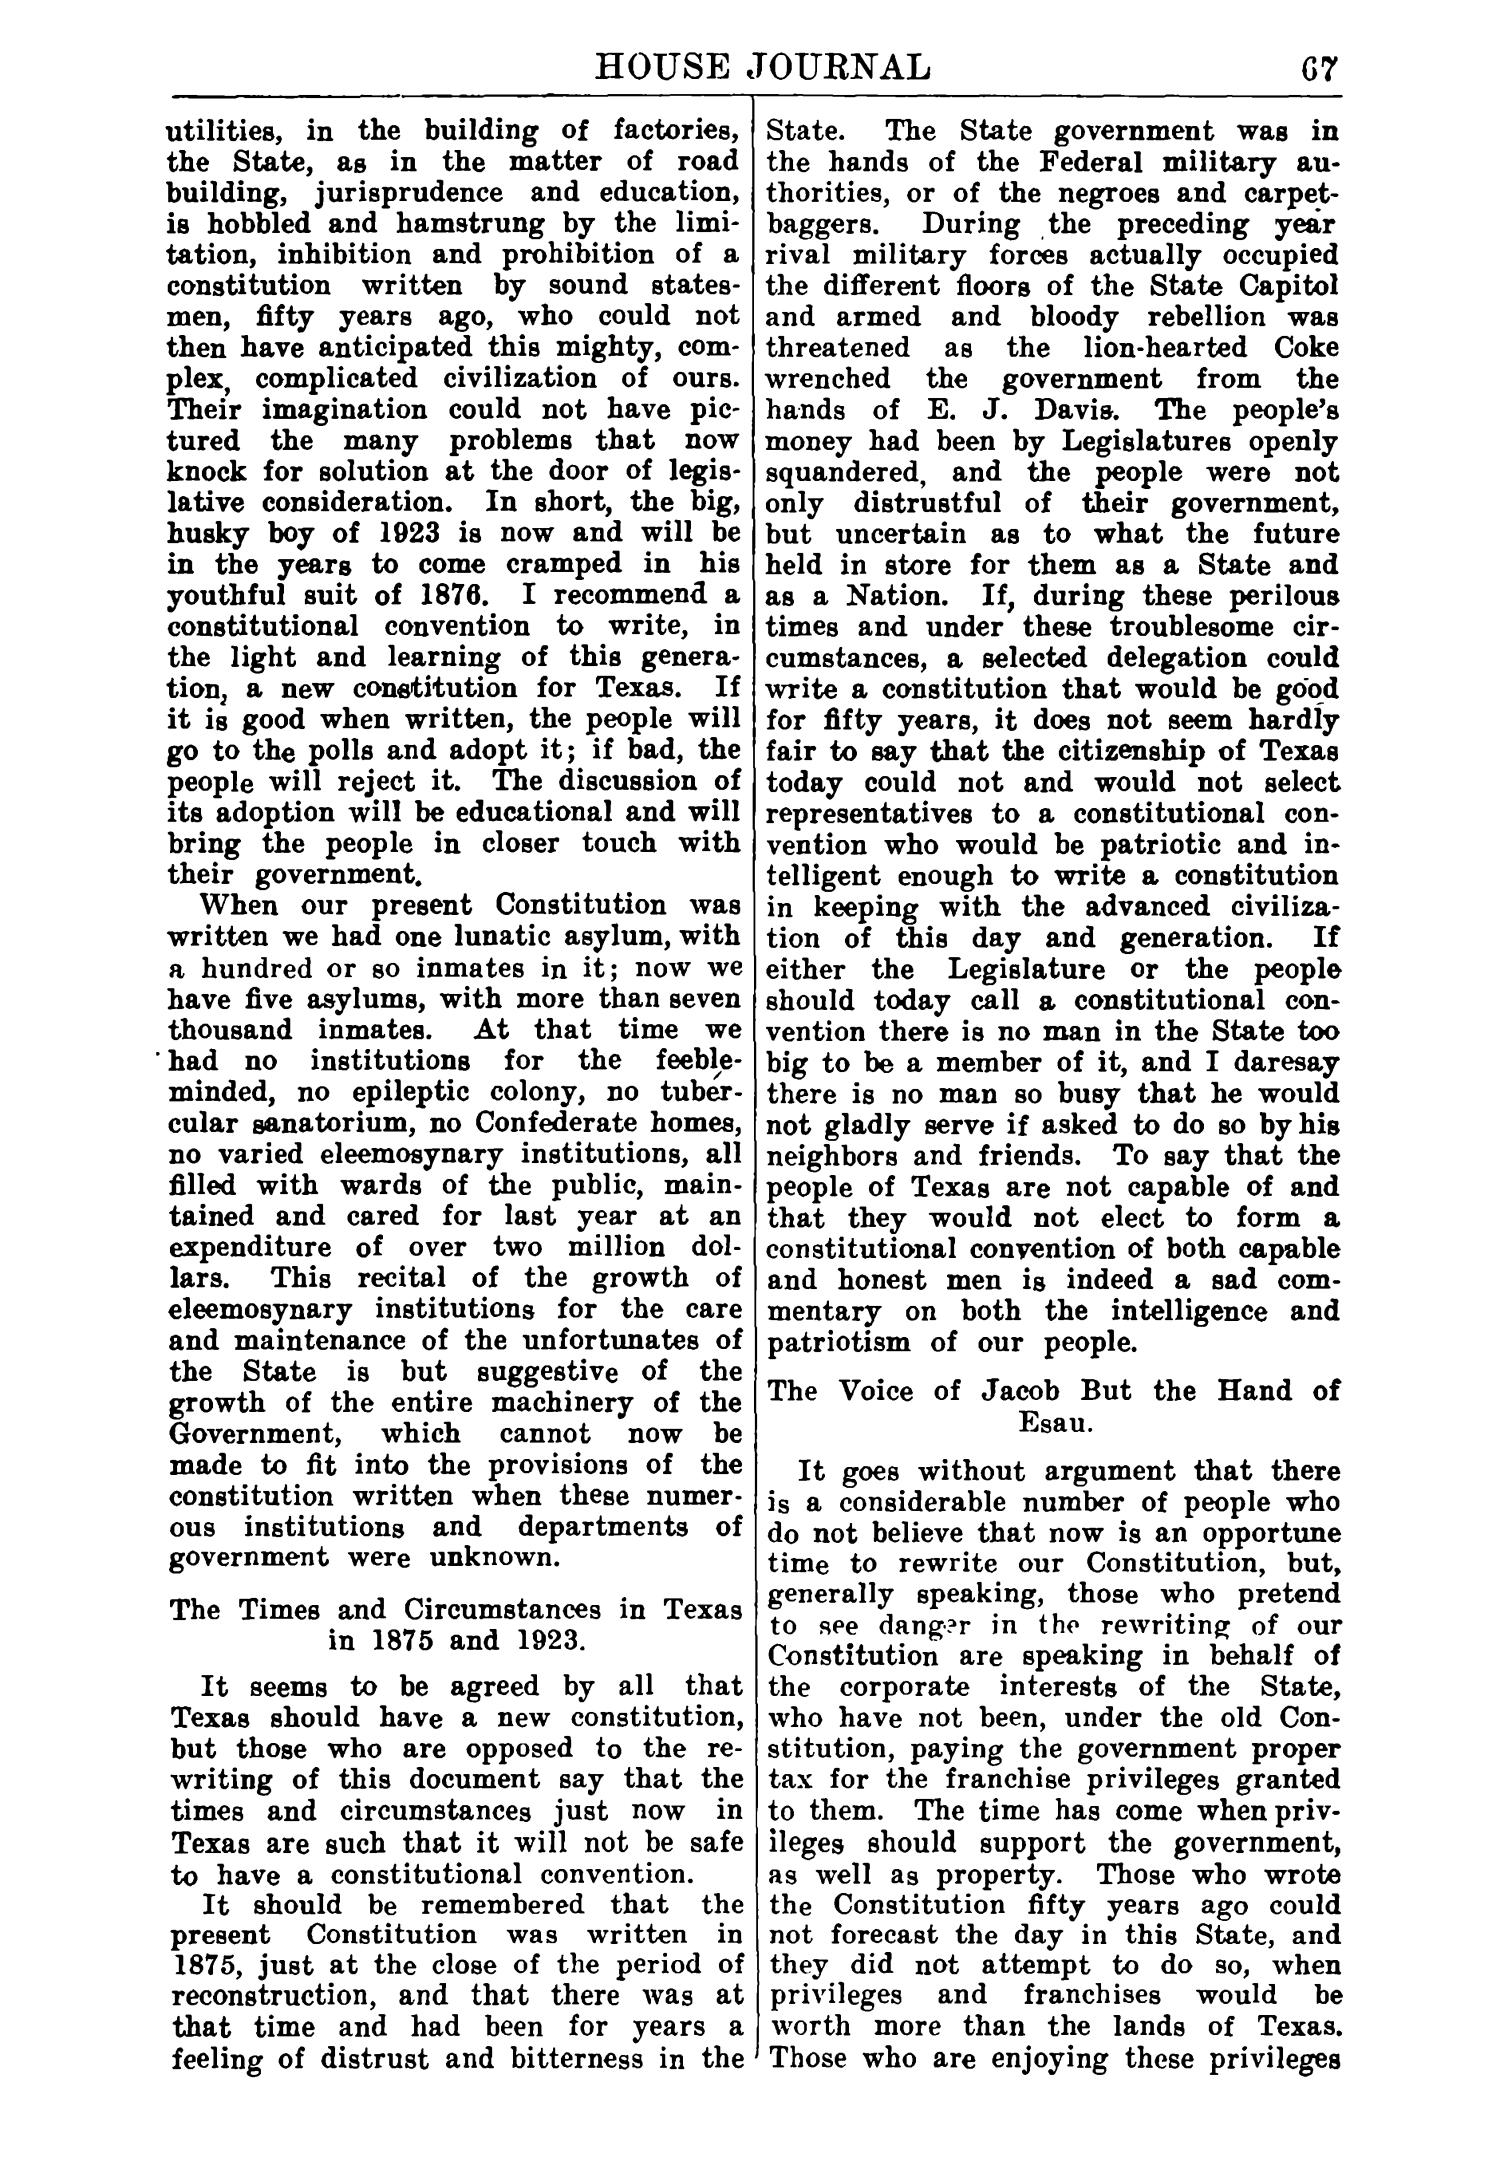 Journal of the House of Representatives of the Regular Session of the Thirty-Eighth Legislature of the State of Texas
                                                
                                                    67
                                                